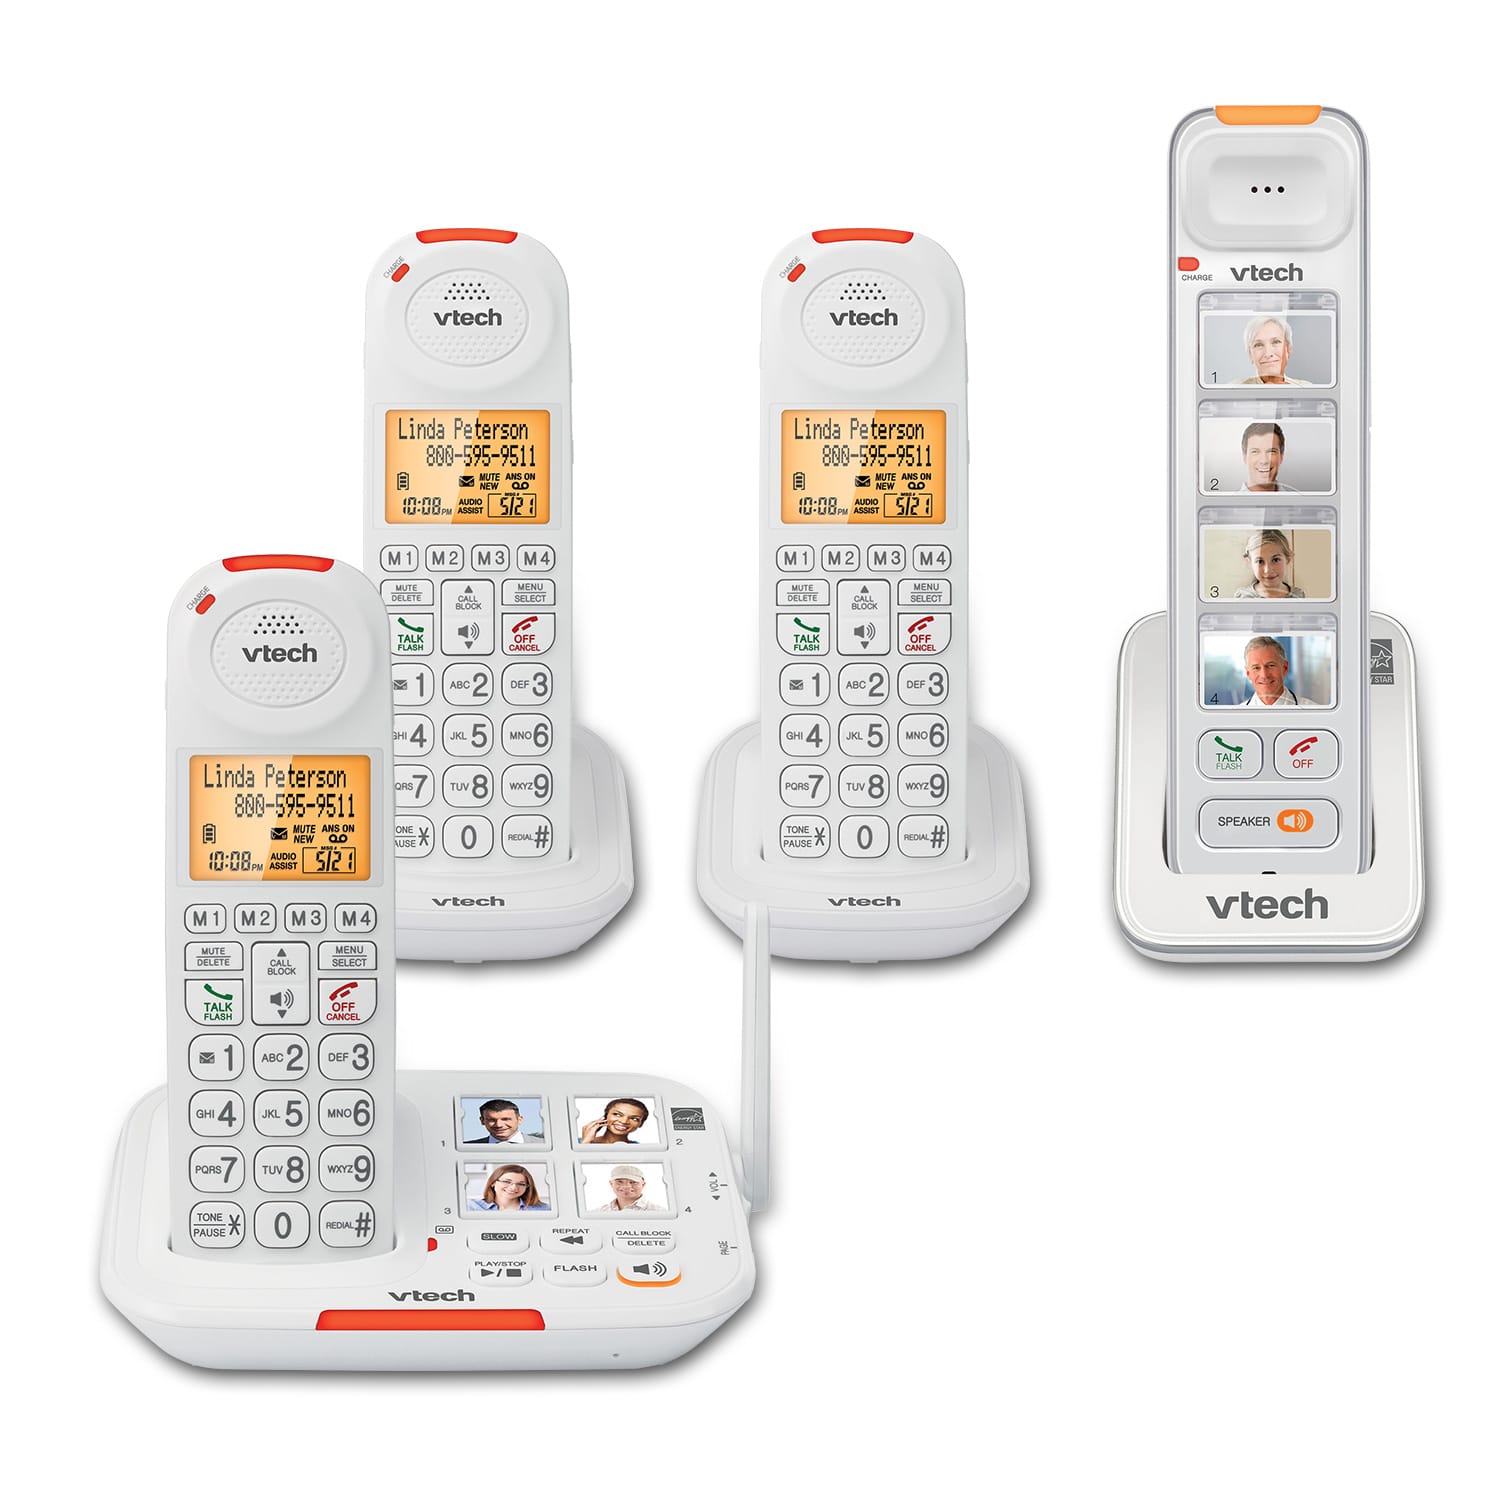 4 Handset Amplified Cordless Answering System with Big Buttons and Display - view 1